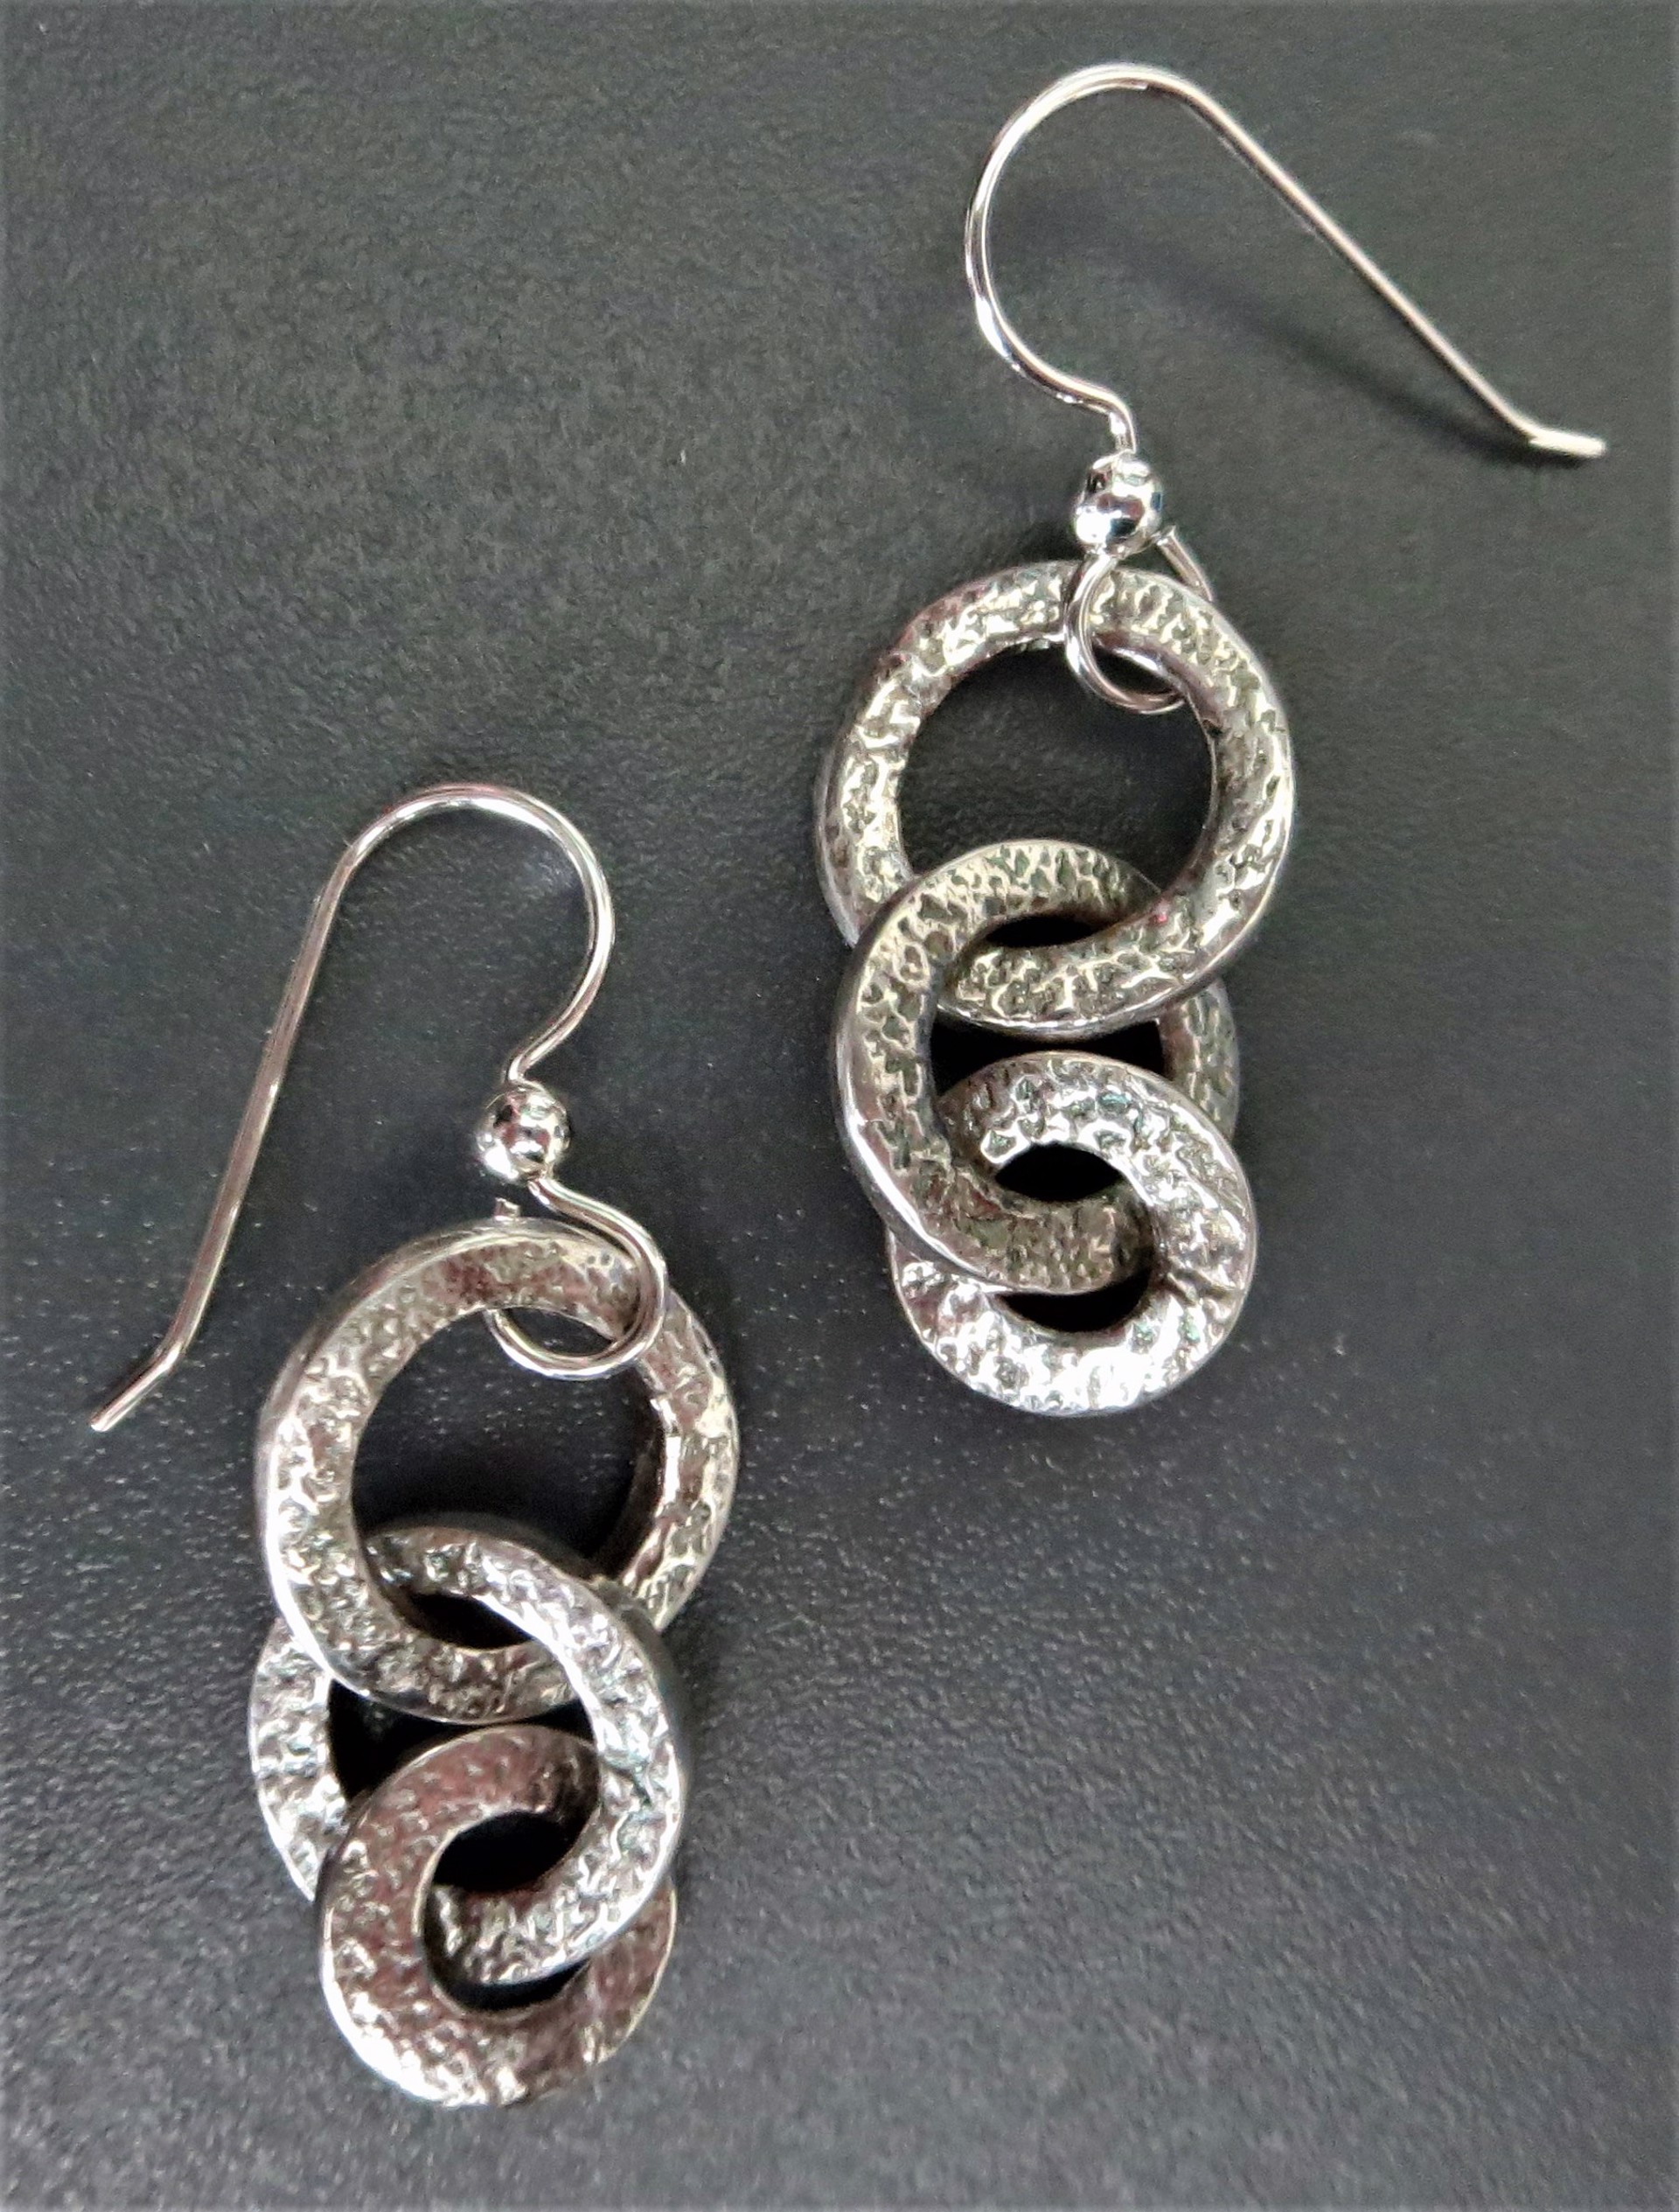 M-742 - Fine Silver Earrings by Donna Rittorno